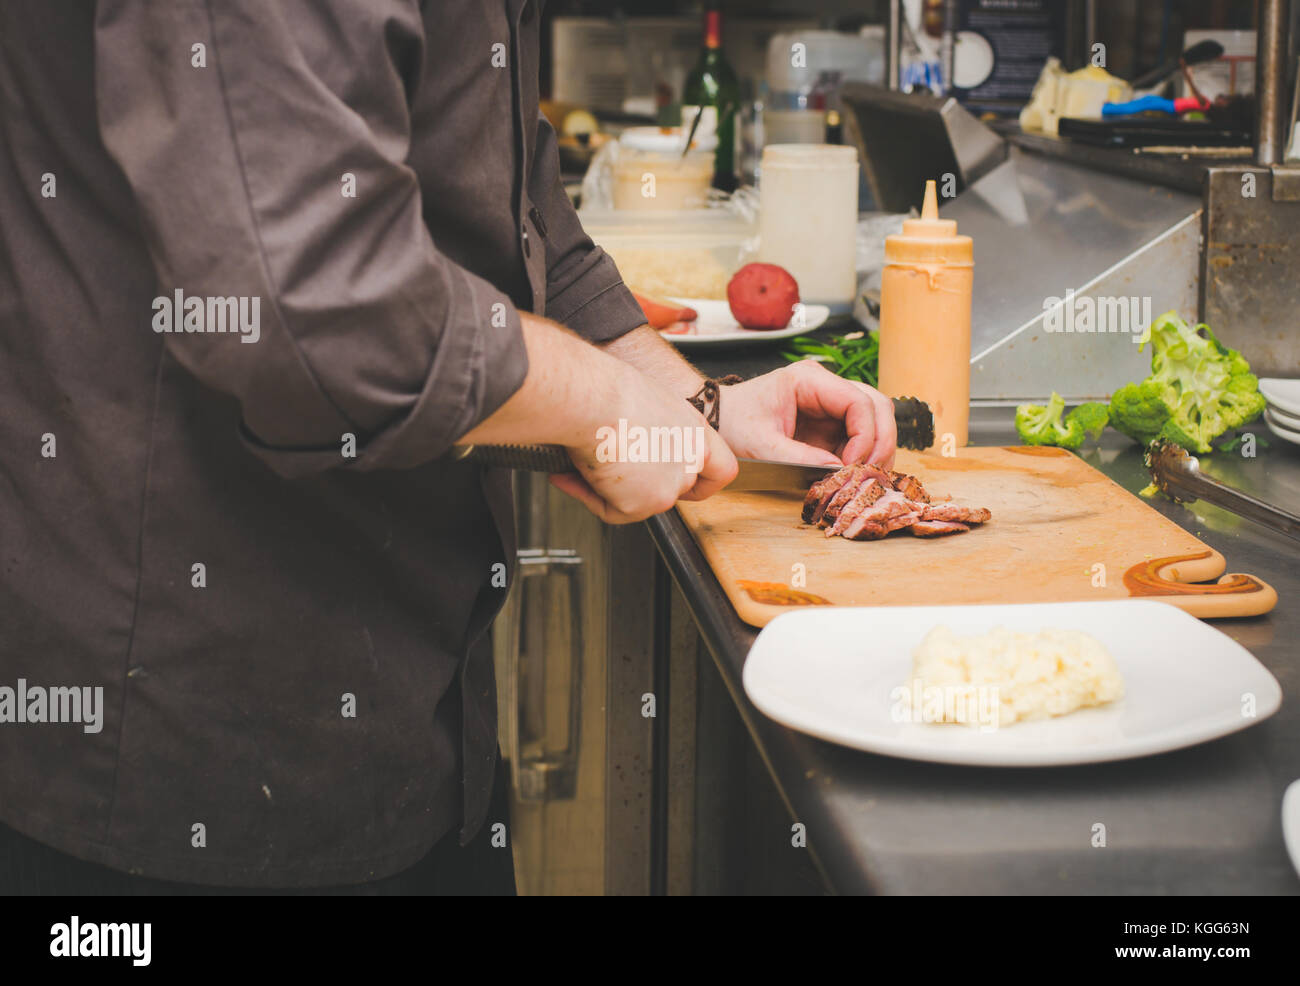 A chef prepares food in the kitchen of a restaurant Stock Photo